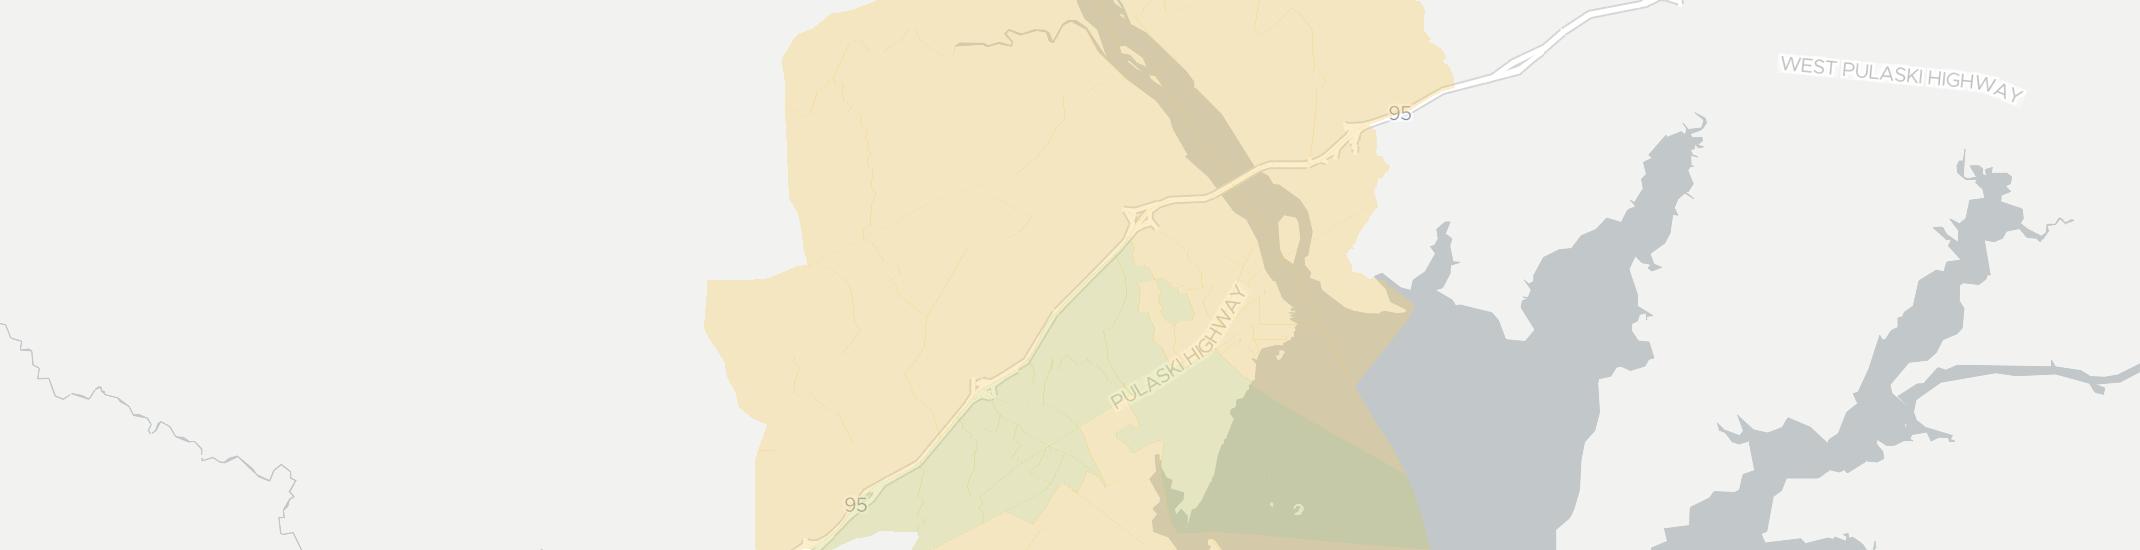 Havre De Grace Internet Competition Map. Click for interactive map.